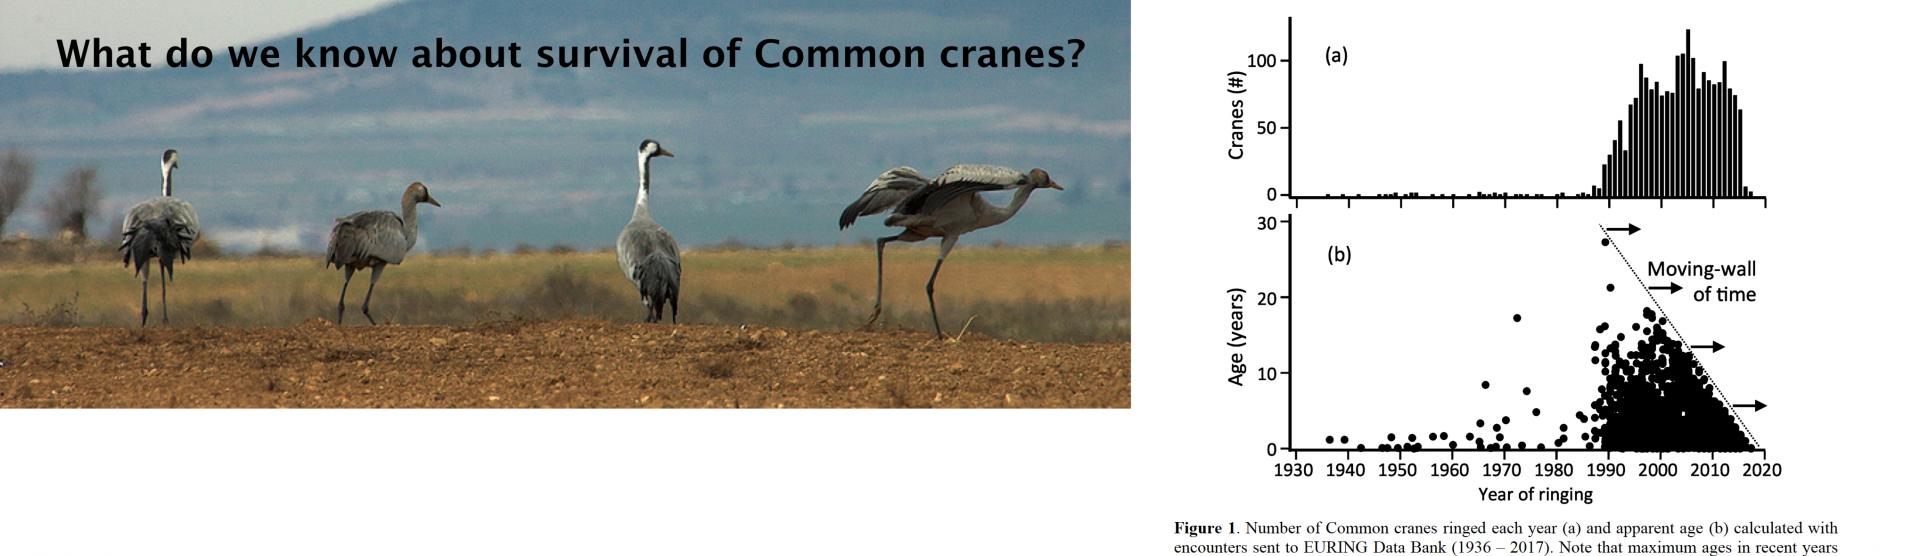 In 1911 it was confirmed that a captive Common crane can live 43 years. About a hundred years later, we still don't know the lifespan of common cranes in the wild. Some people believe that twelve years is a reasonable estimate, but other guesses from re-sightings of tagged cranes put forward six years as a likely lifespan in the wild for most Common cranes. This second guess is hardly compatible with the age of successful first reproduction (c. 5 years). A pretty mess, right?